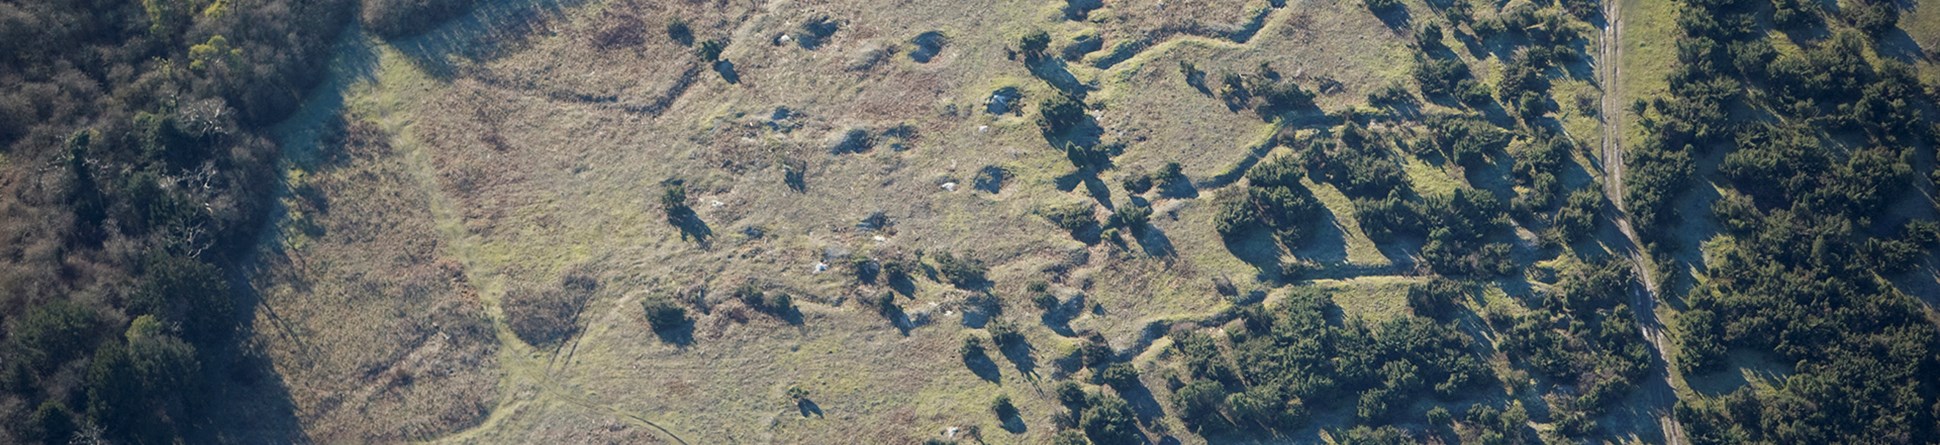 The earthwork patterns of practice trenches, Beacon Hill, Wiltshire, during the war the countryside became increasingly militarised as land was acquired for training areas, camps, airfields, and factories.